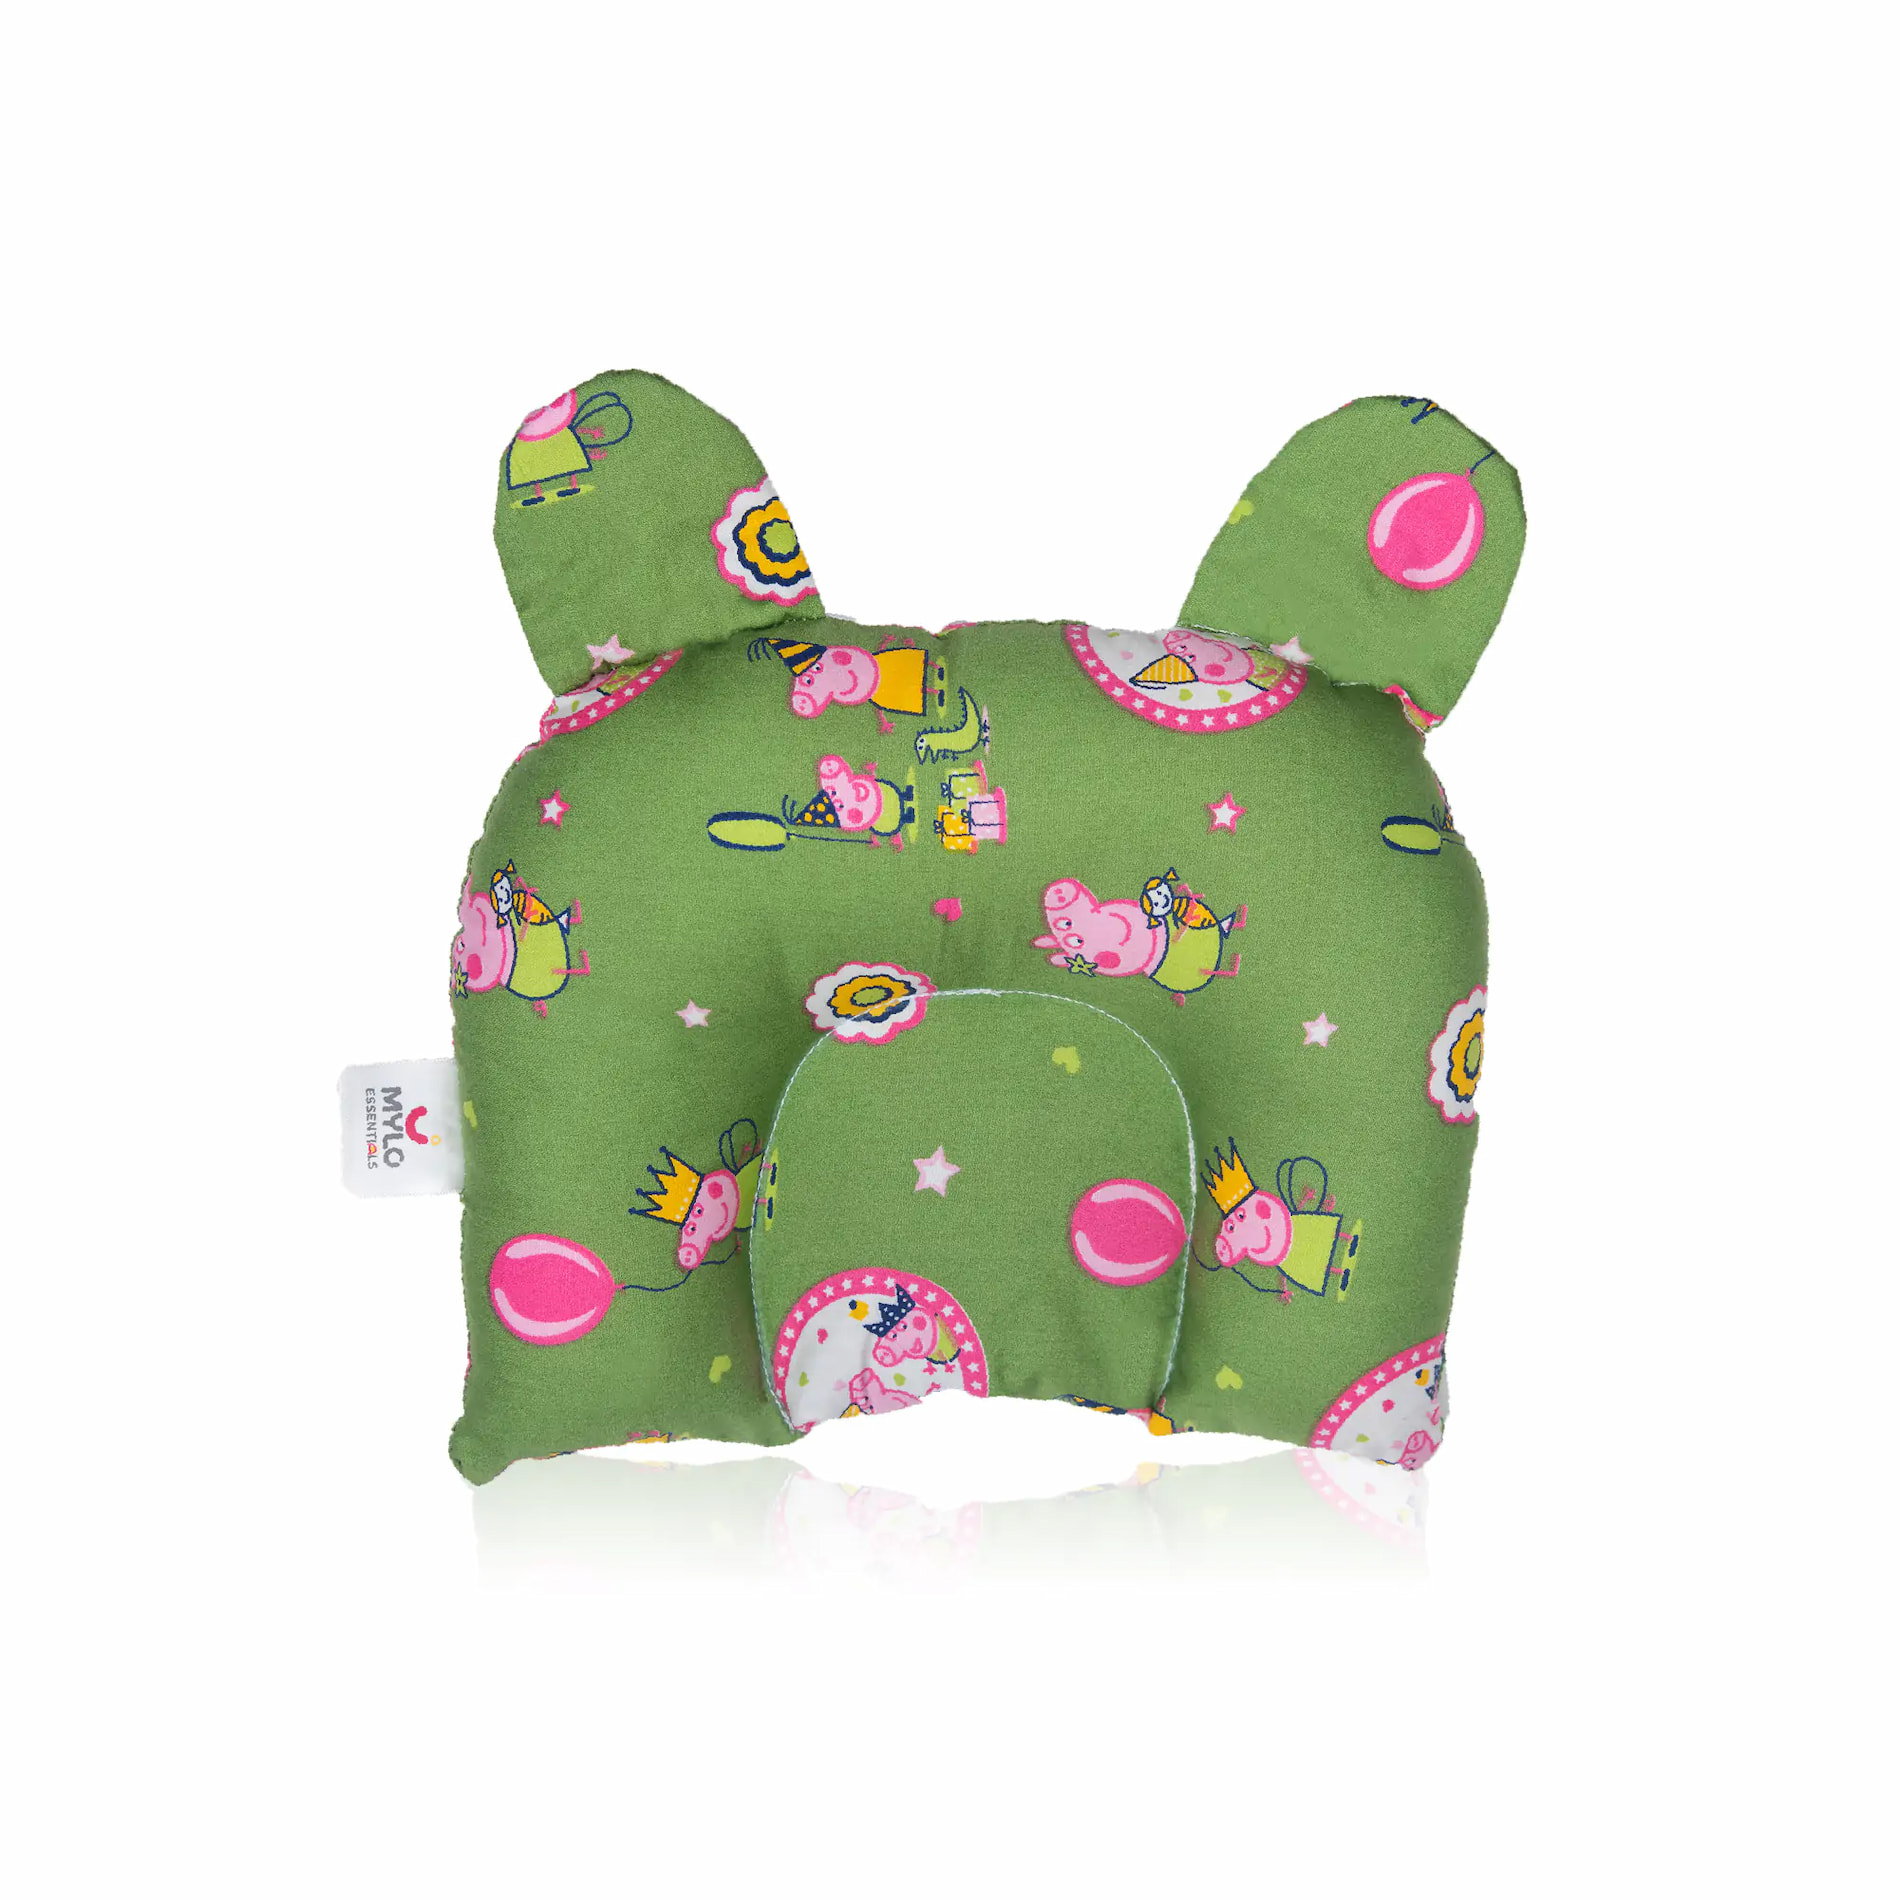 Baby Head Shaping Pillow with Mustard Seeds (0-12 Months) - Bunny Shaped (Peppa Party Green)